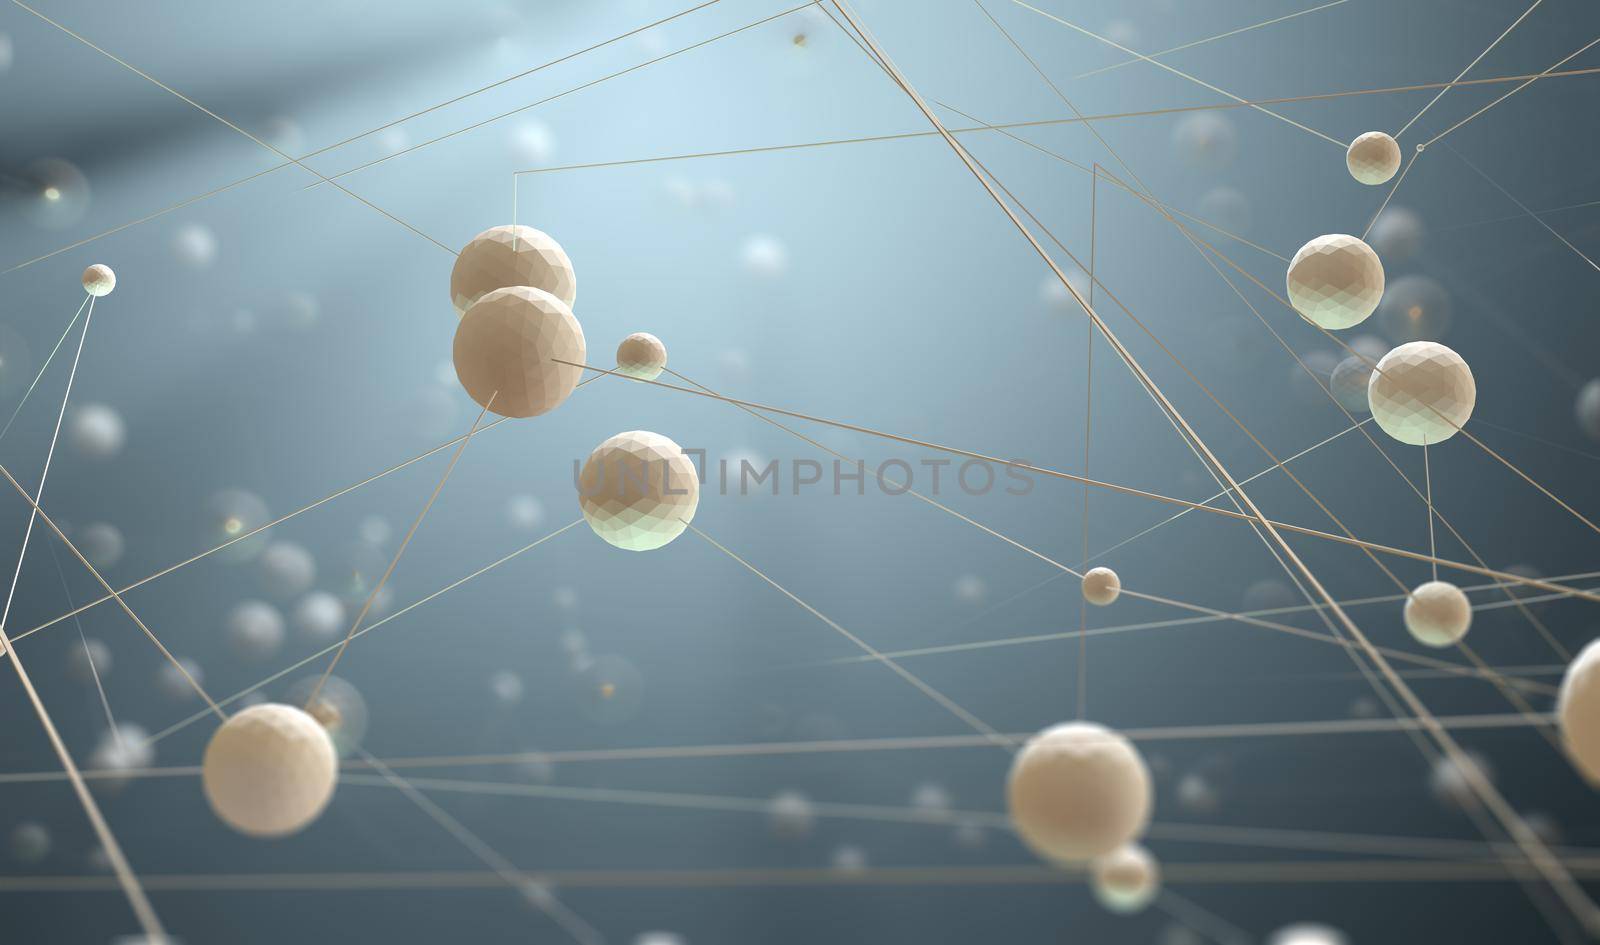 Abstract 3d illustration of science innovation and modern technology